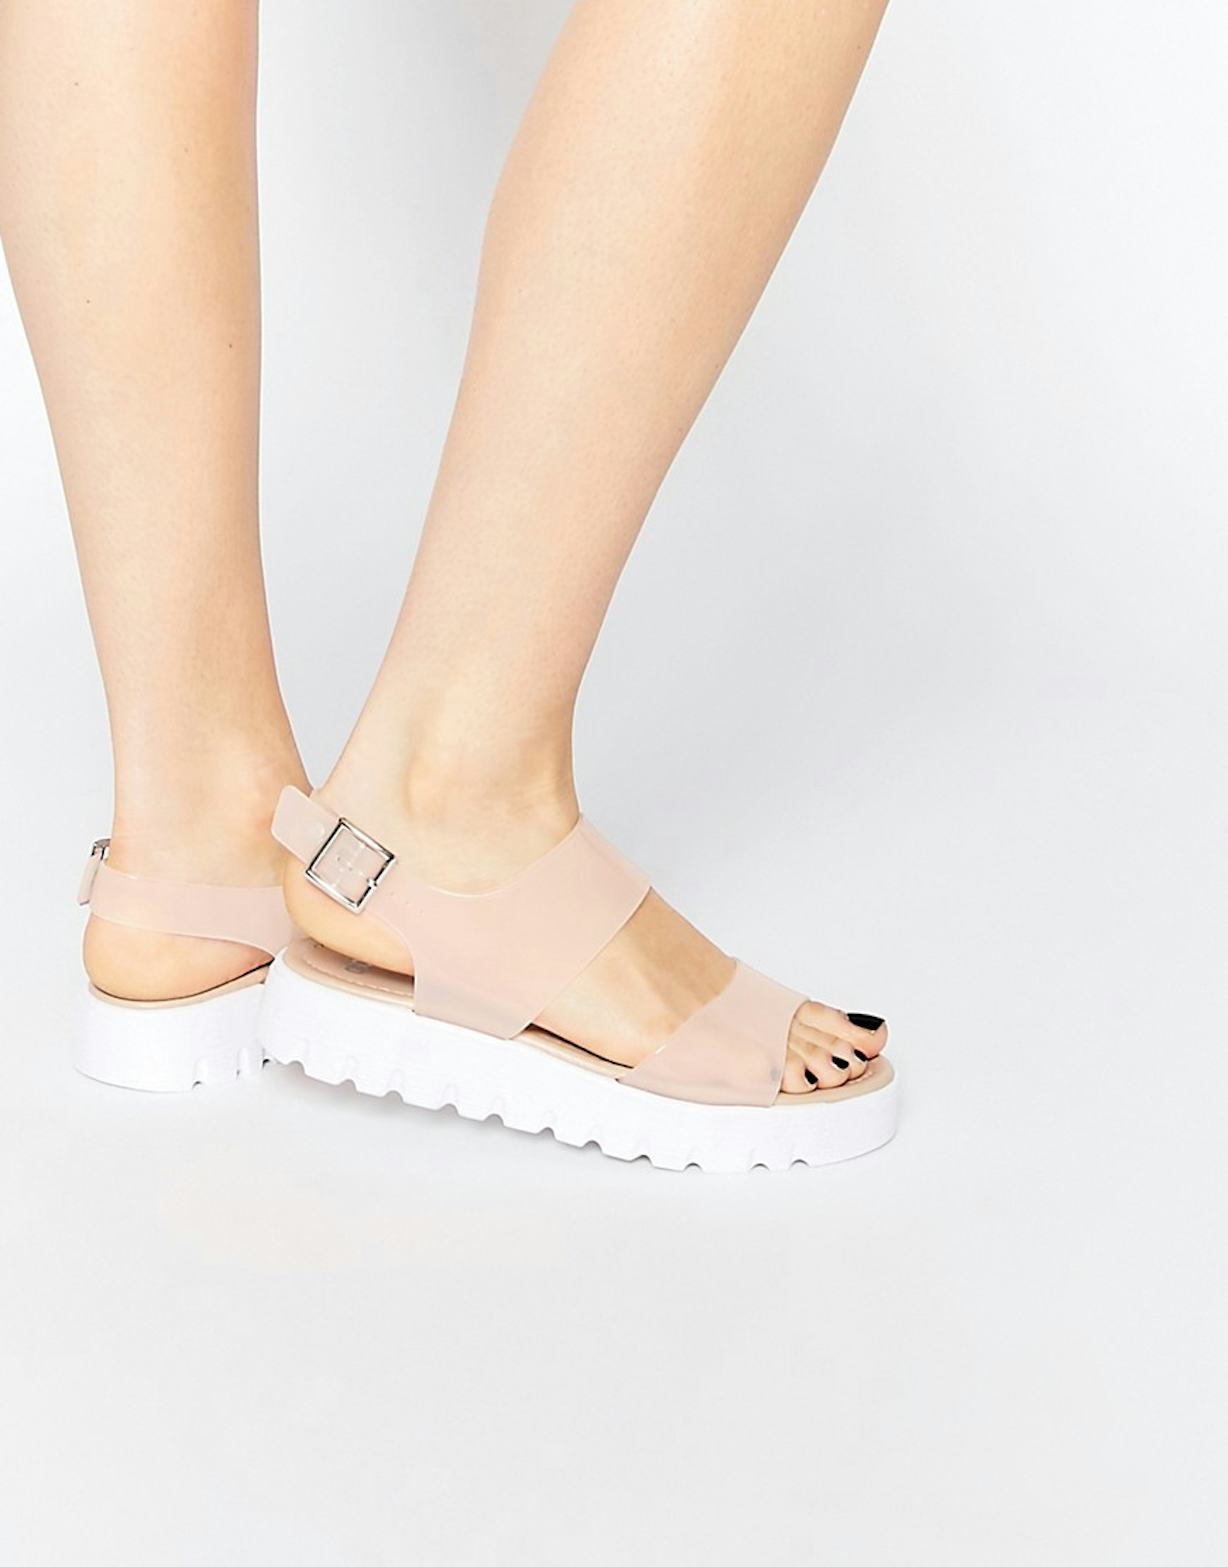 11 Modern Equivalents Of Your Fave '90s Sandals — PHOTOS